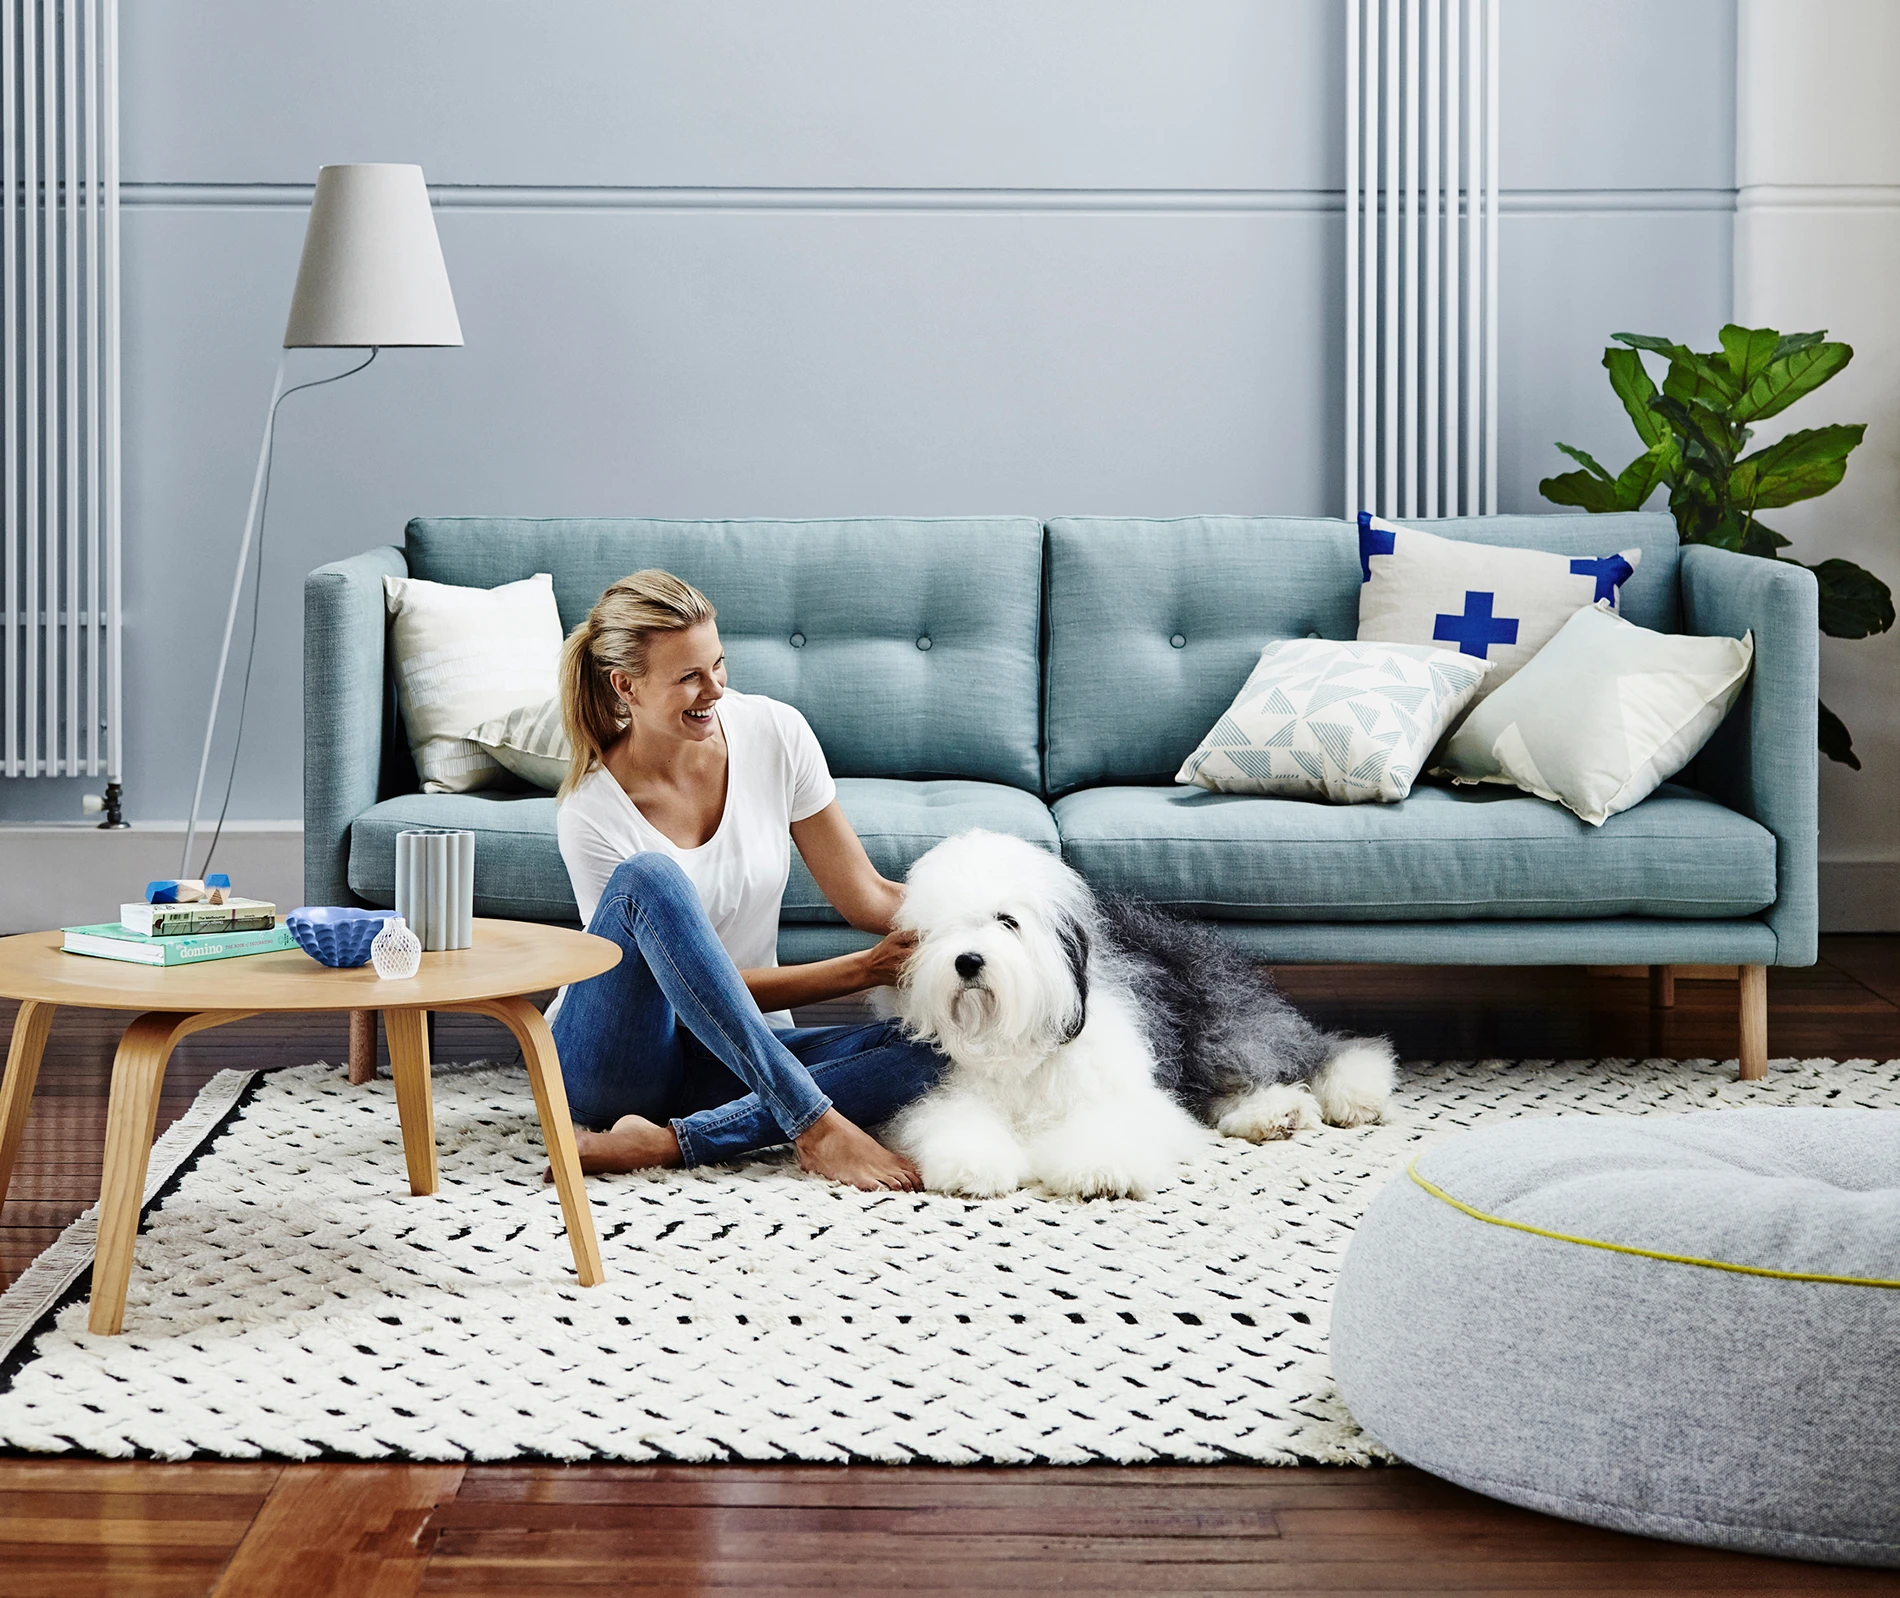 Woman and dog on floor in blue living room with blue couch